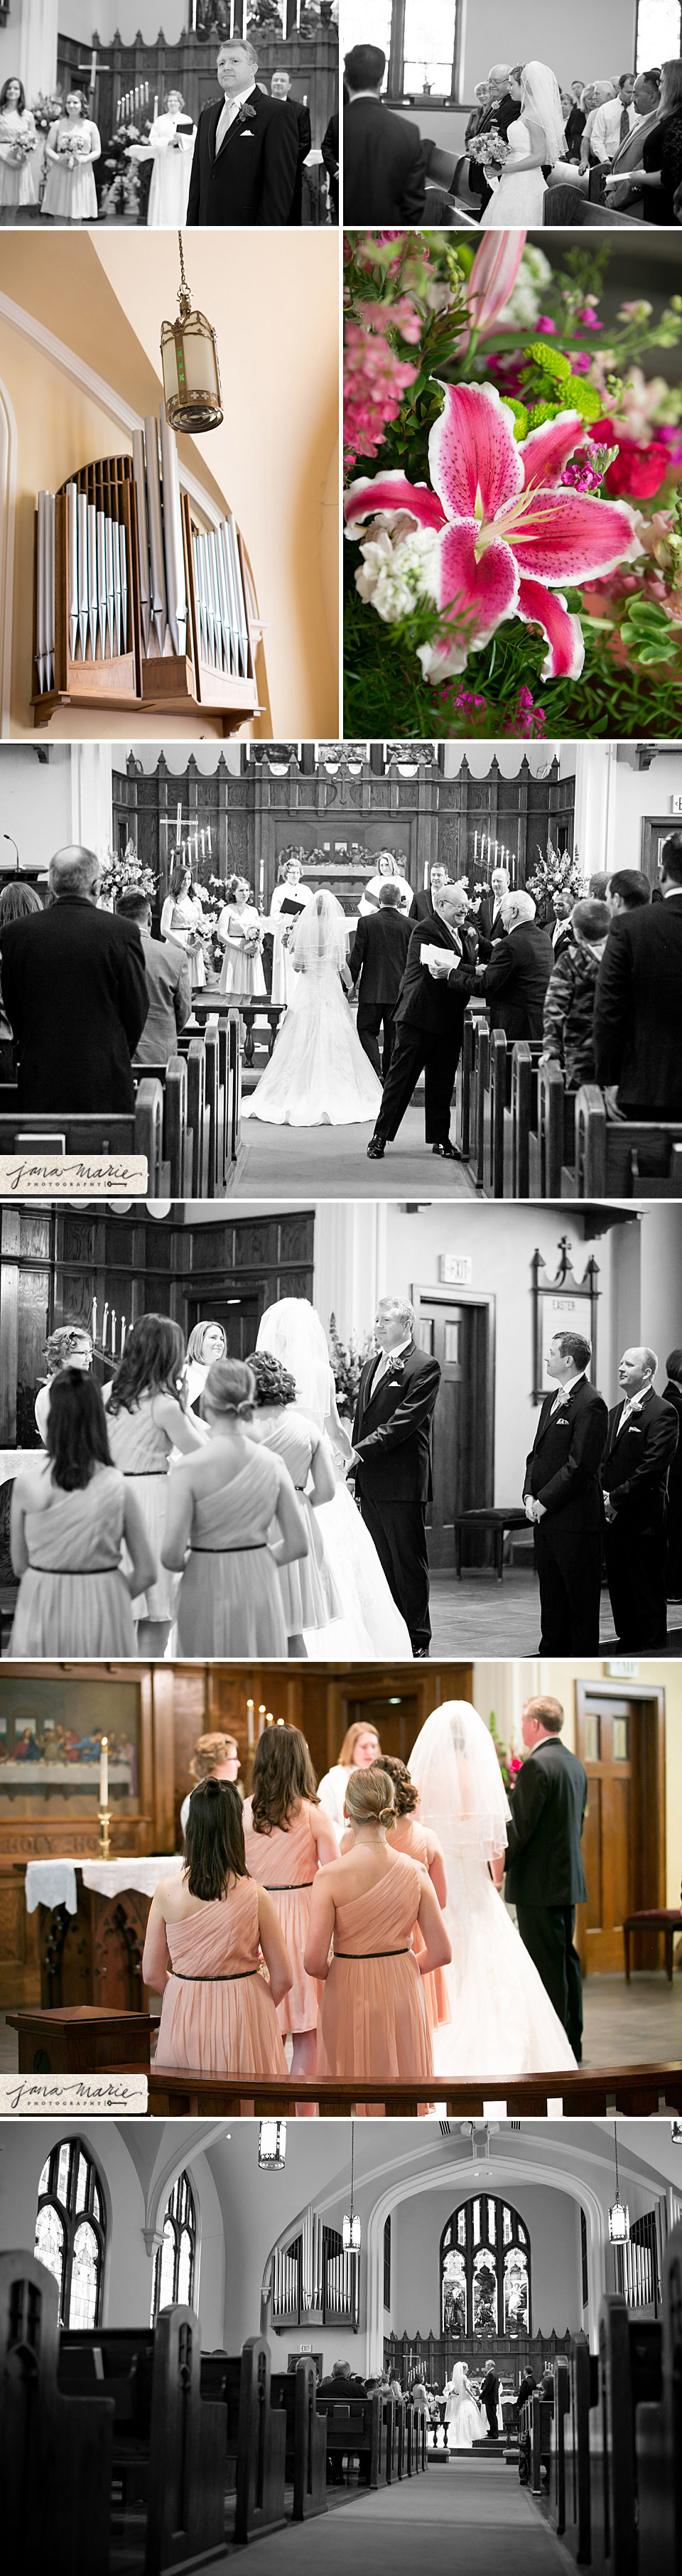 Immanuel Lutheran, Wedding service, Musical pipes, Bride and groom, Black and white wedding photographer, KC weddings